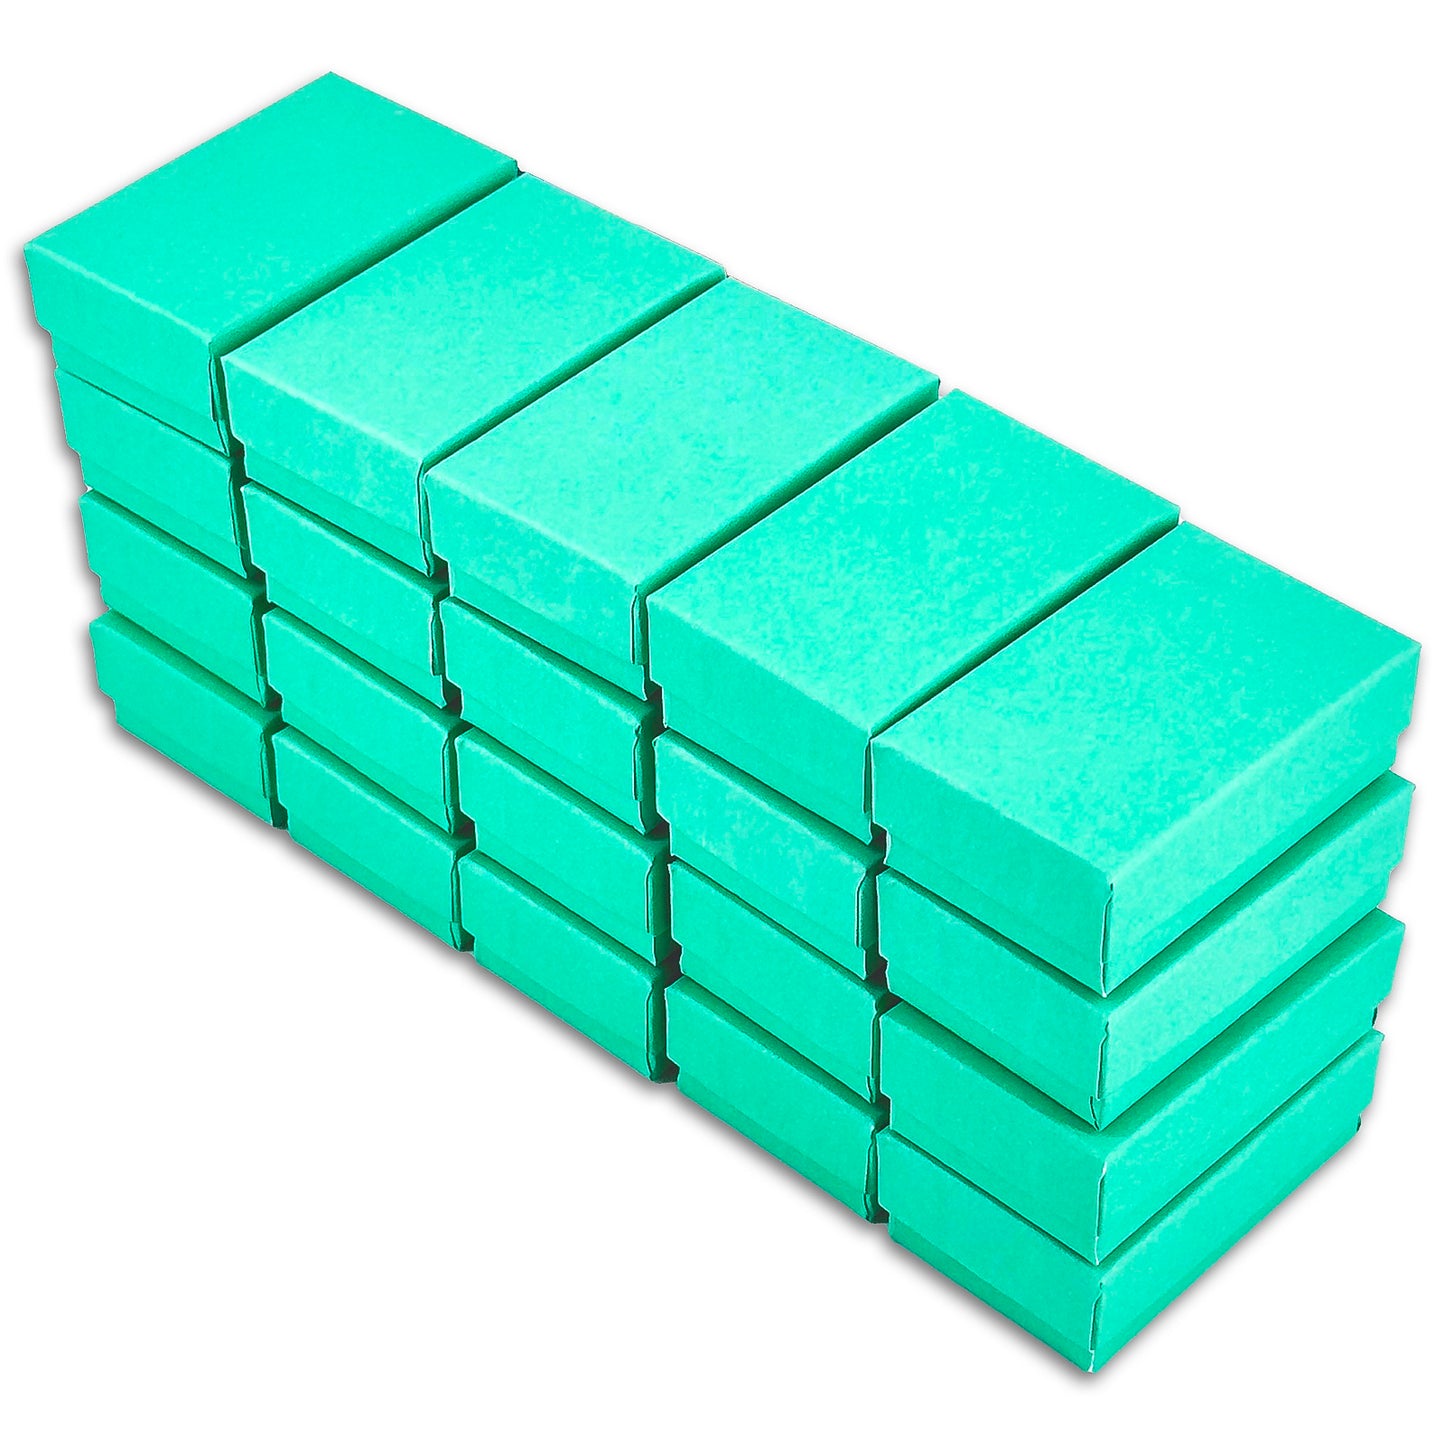 1 7/8" x 1 1/4" x 5/8" Teal Green Cotton Filled Paper Box